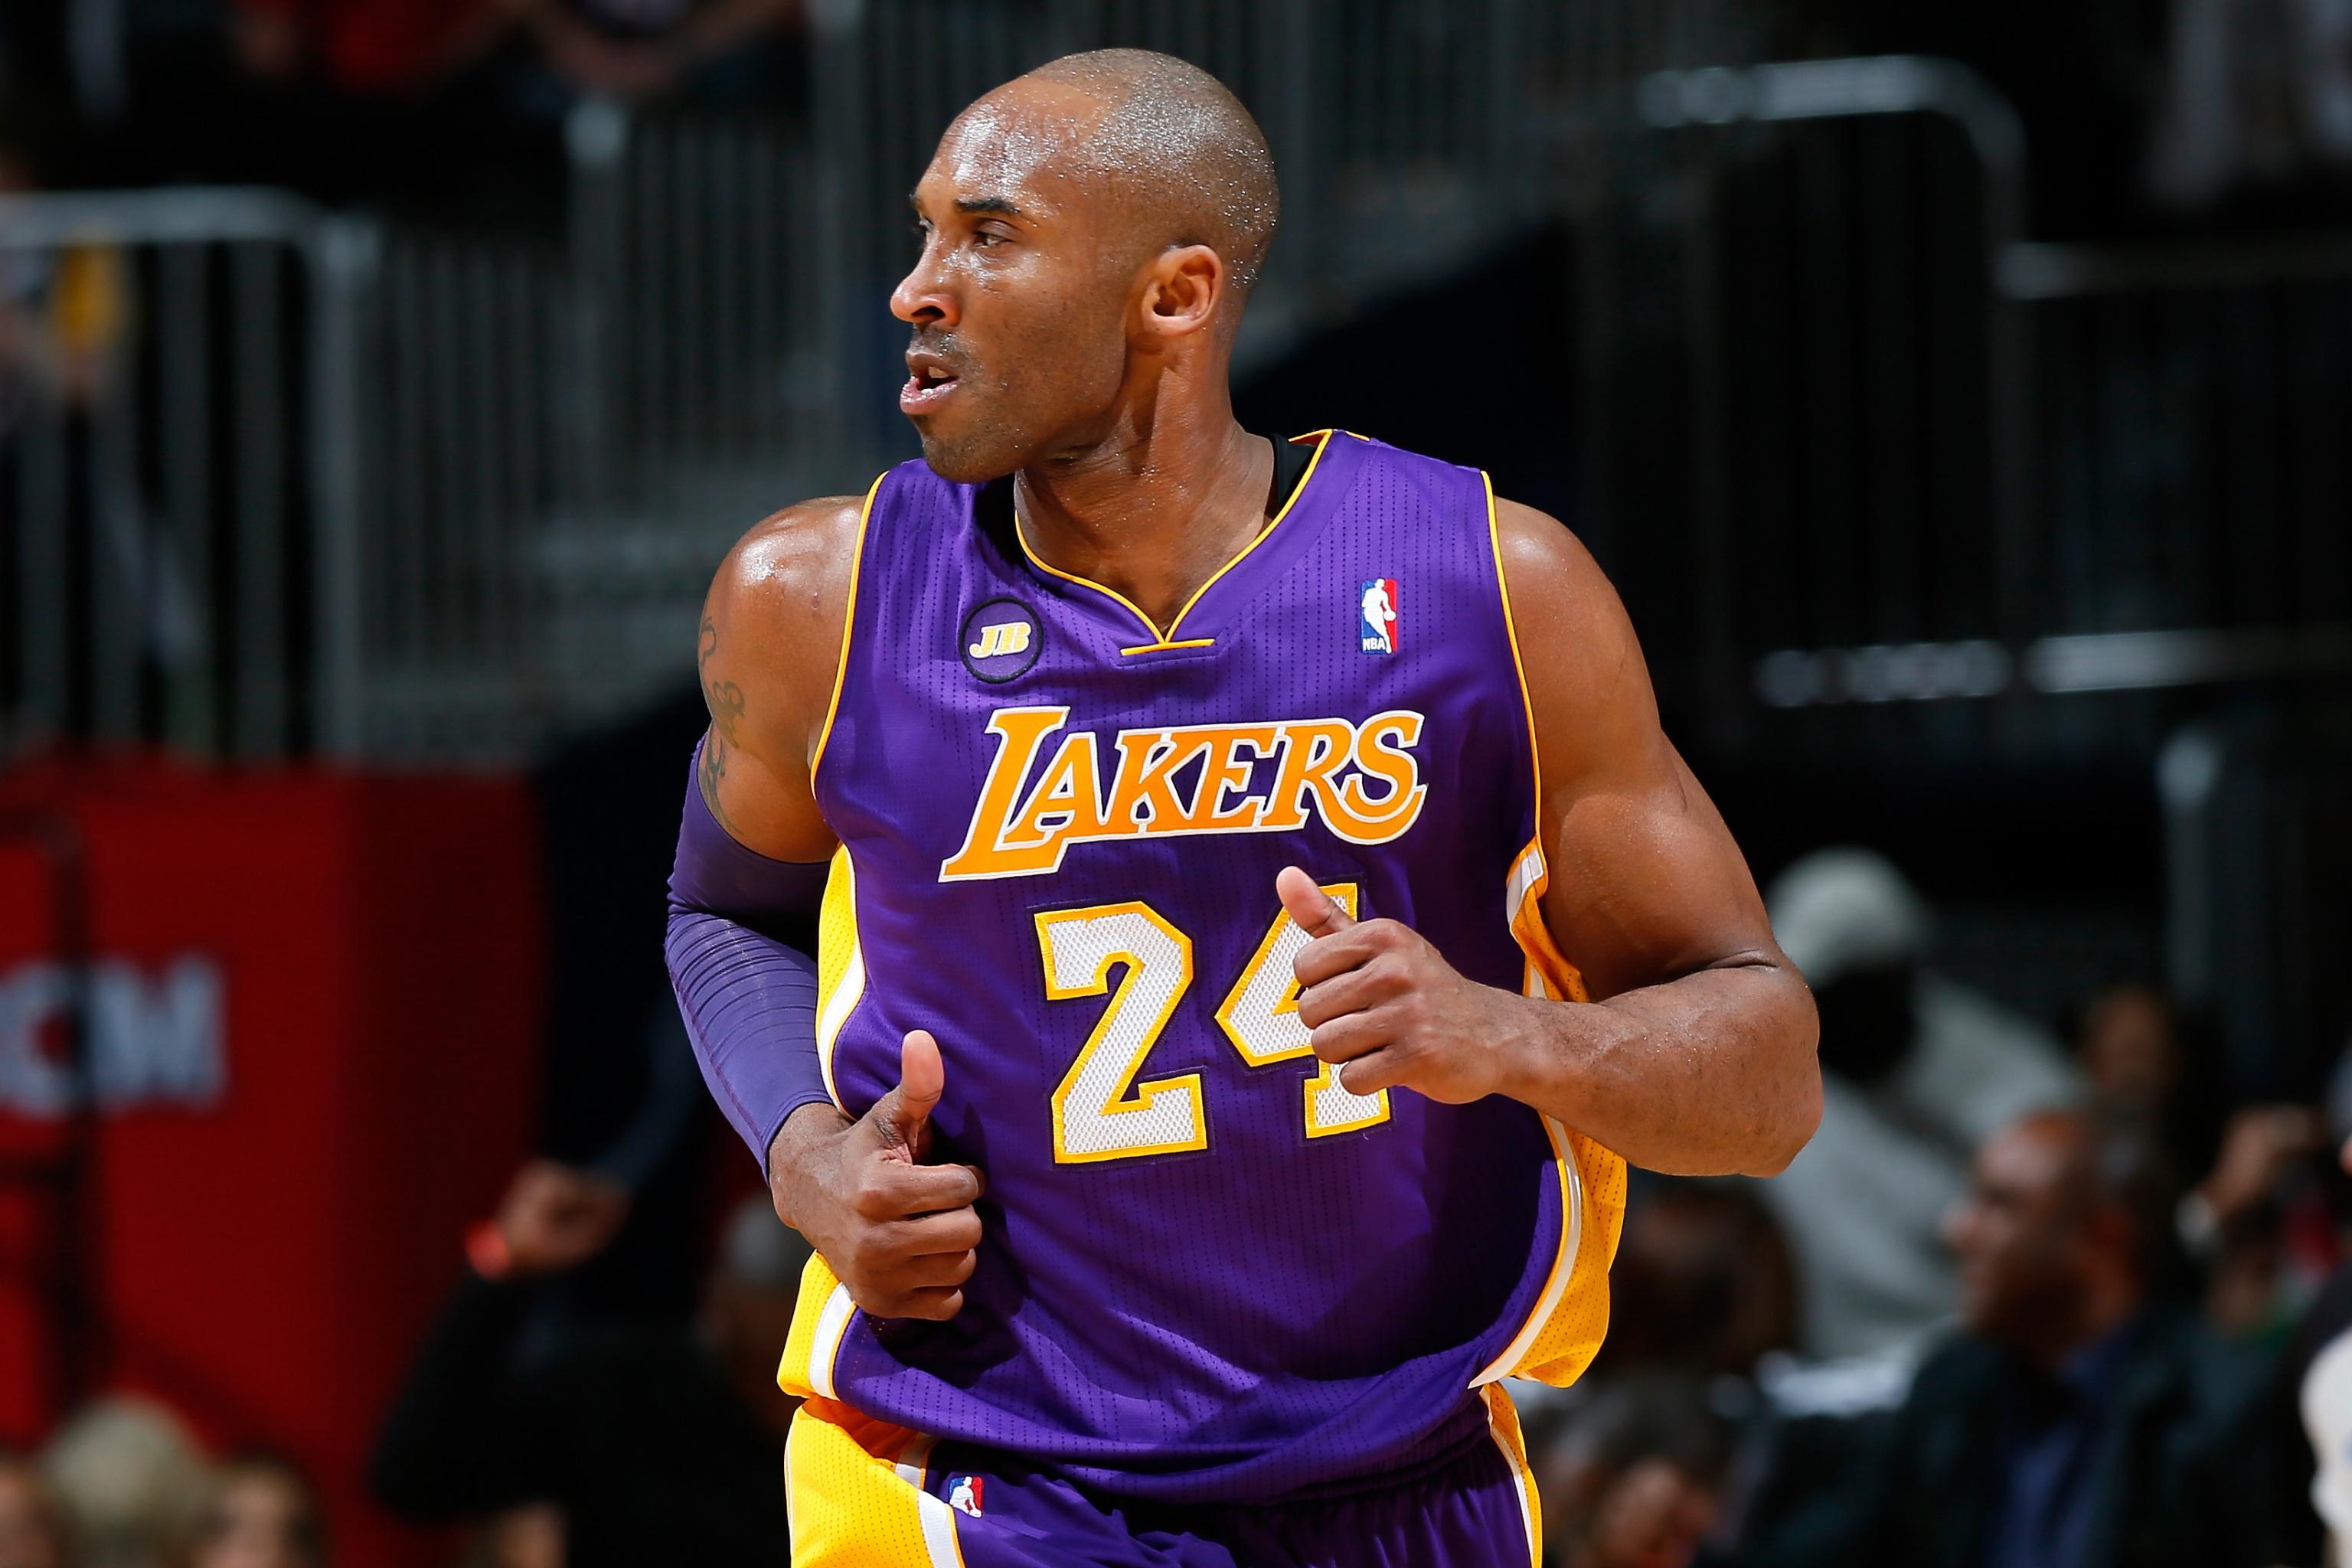 Kobe Bryant was one of a kind even in retirement